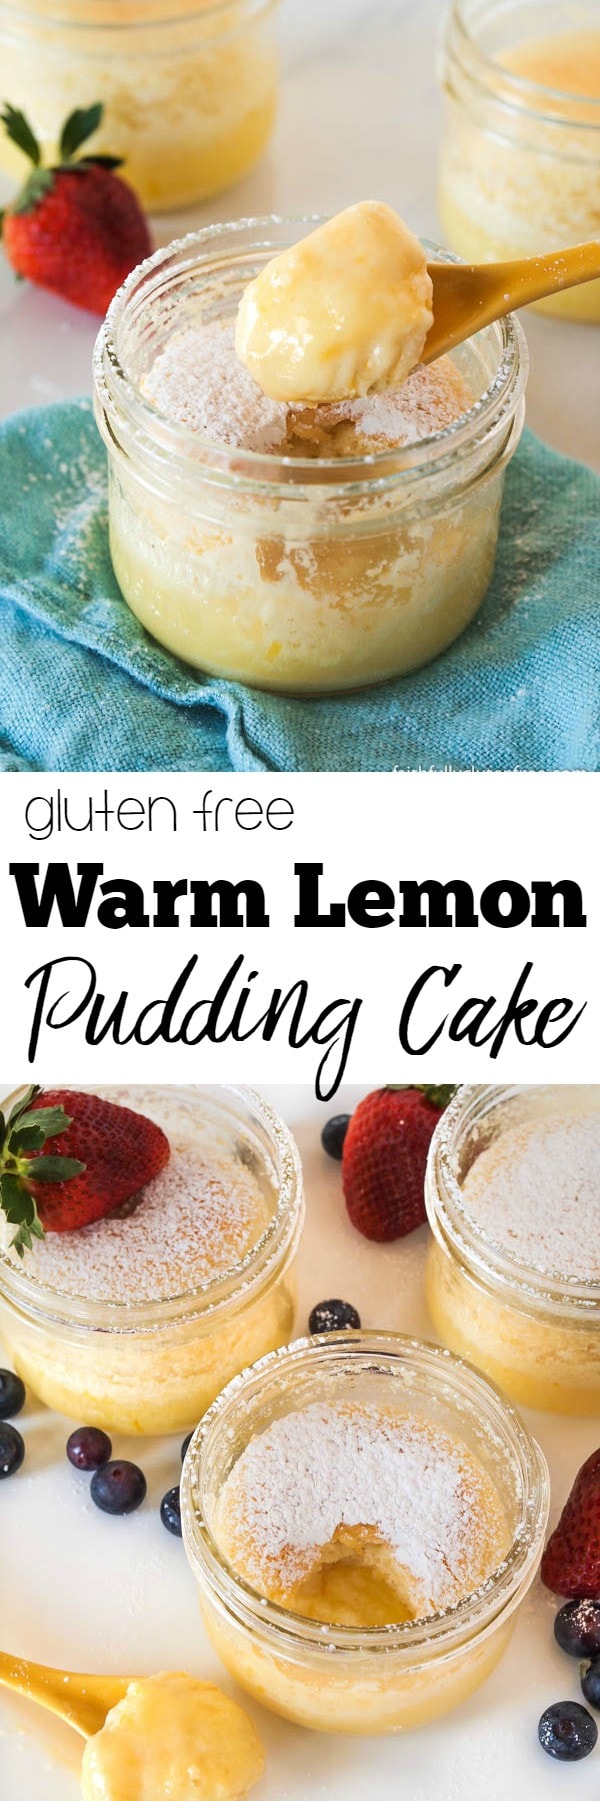 This Gluten Free Warm Lemon Pudding Cake is magical. While it is baking, it creates a light, airy cake on top, with a tangy lemon pudding on the bottom. Sprinkle with some confectioners' sugar before serving, and you've got one impressive (and easy) dessert.